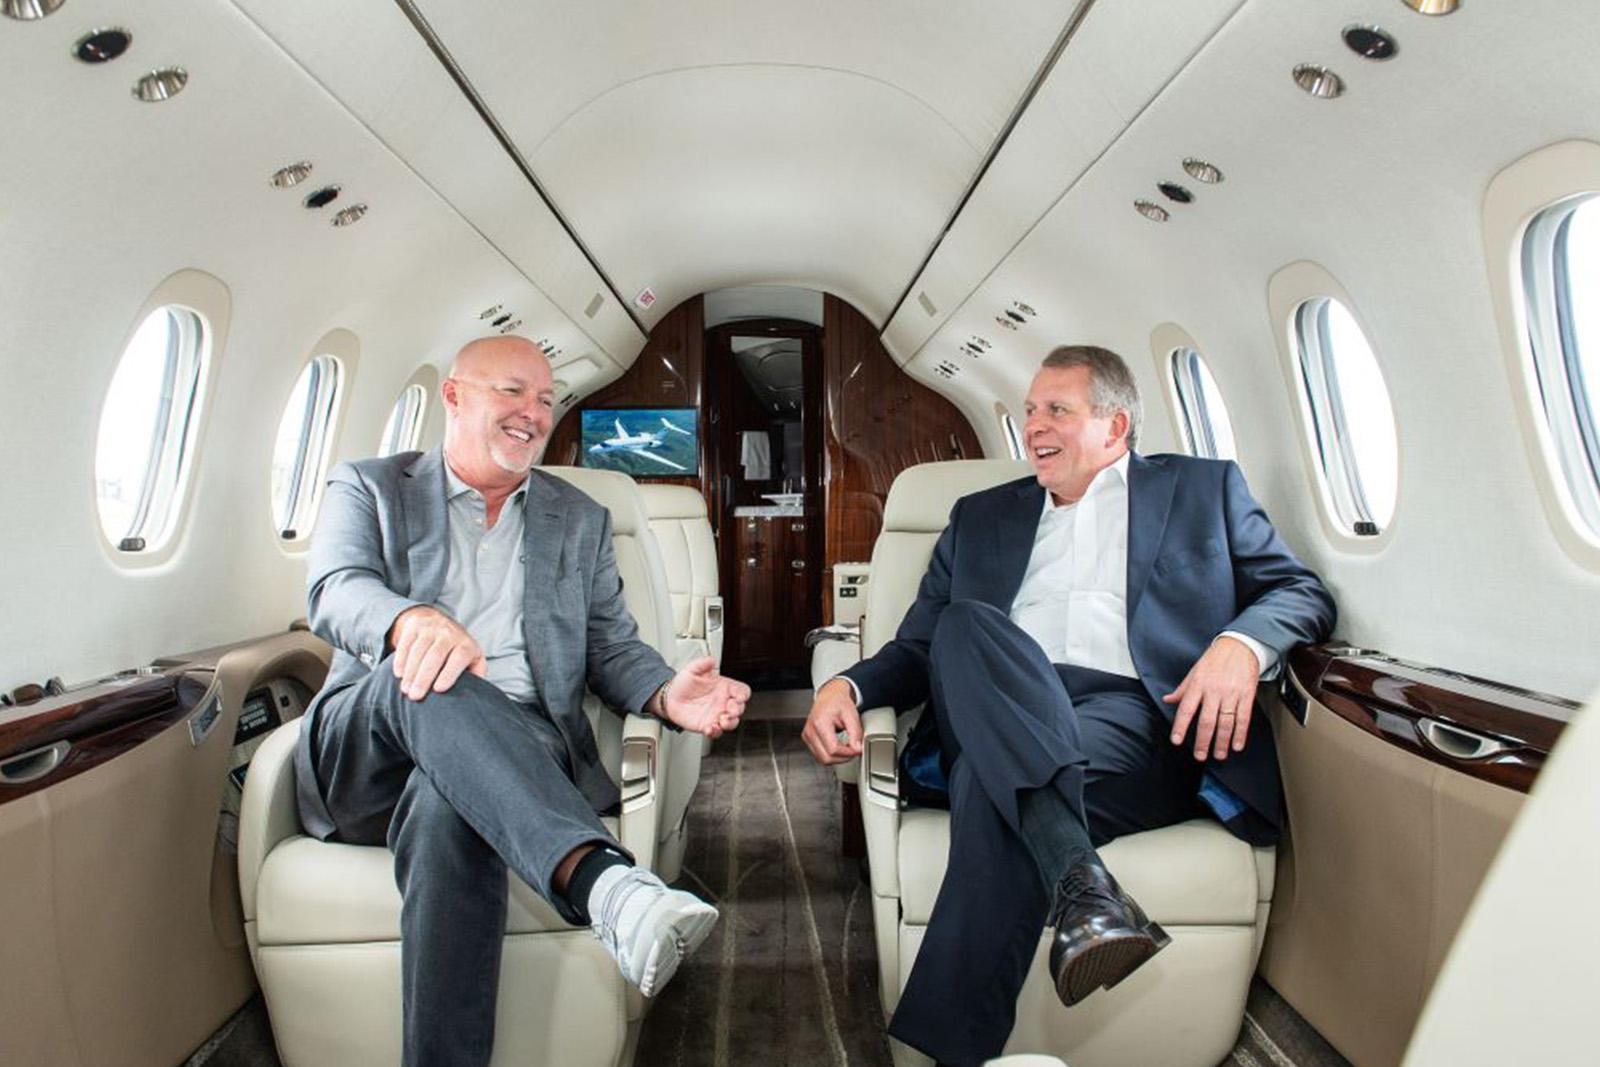 Two Fast-Growing Private Jet Operators Place Orders With Textron